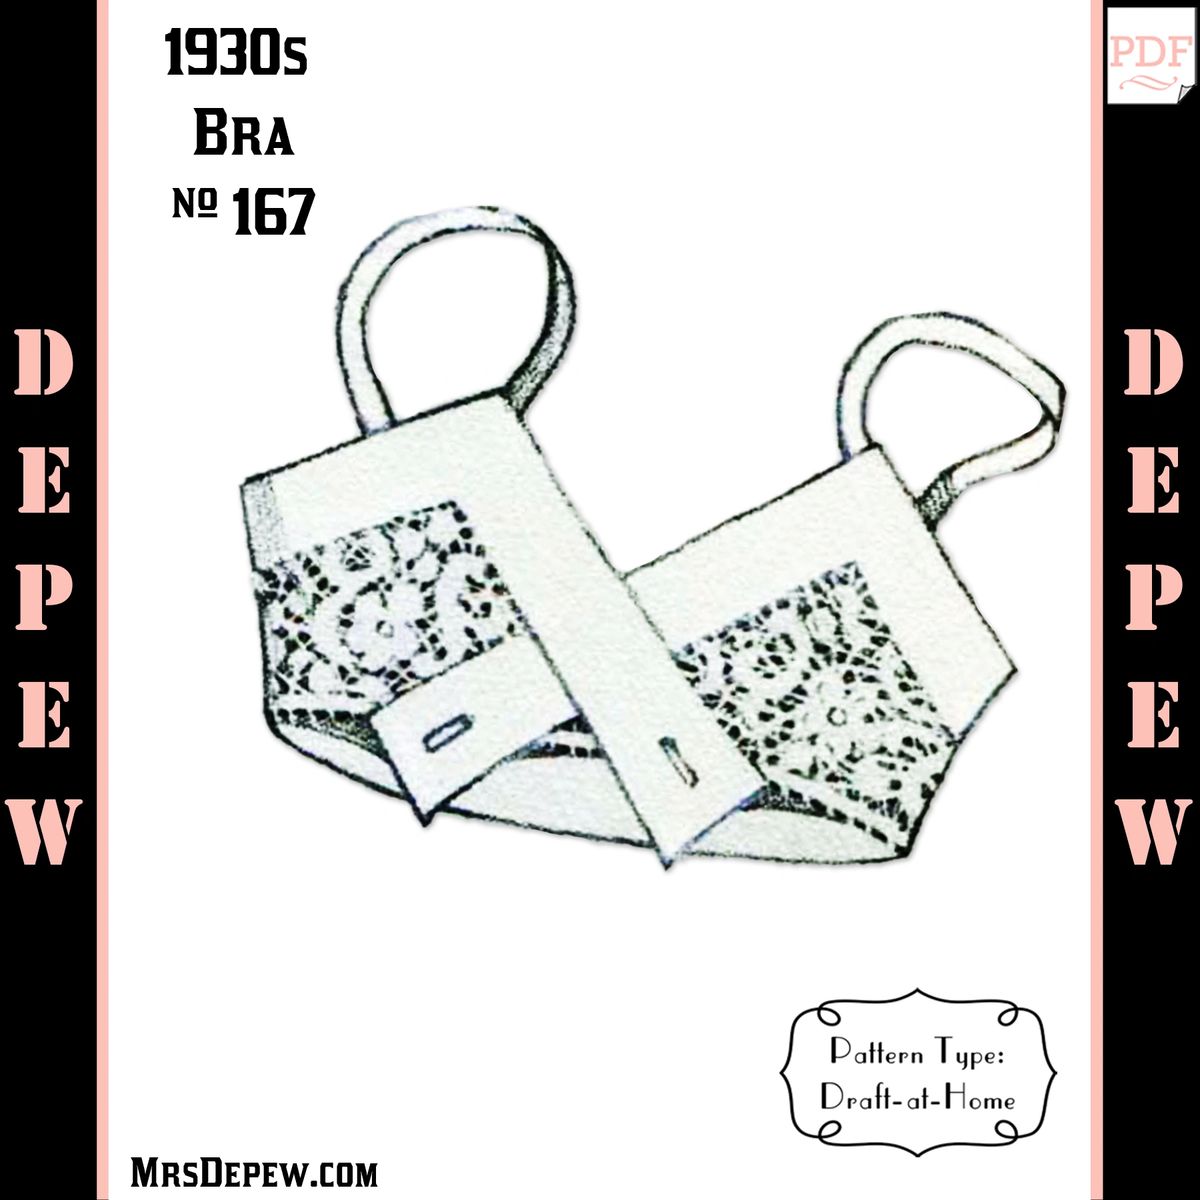 D-A-H Vintage Sewing Pattern 1930s French Bra With Lace Inset in Any Size -  PLUS Size Included 